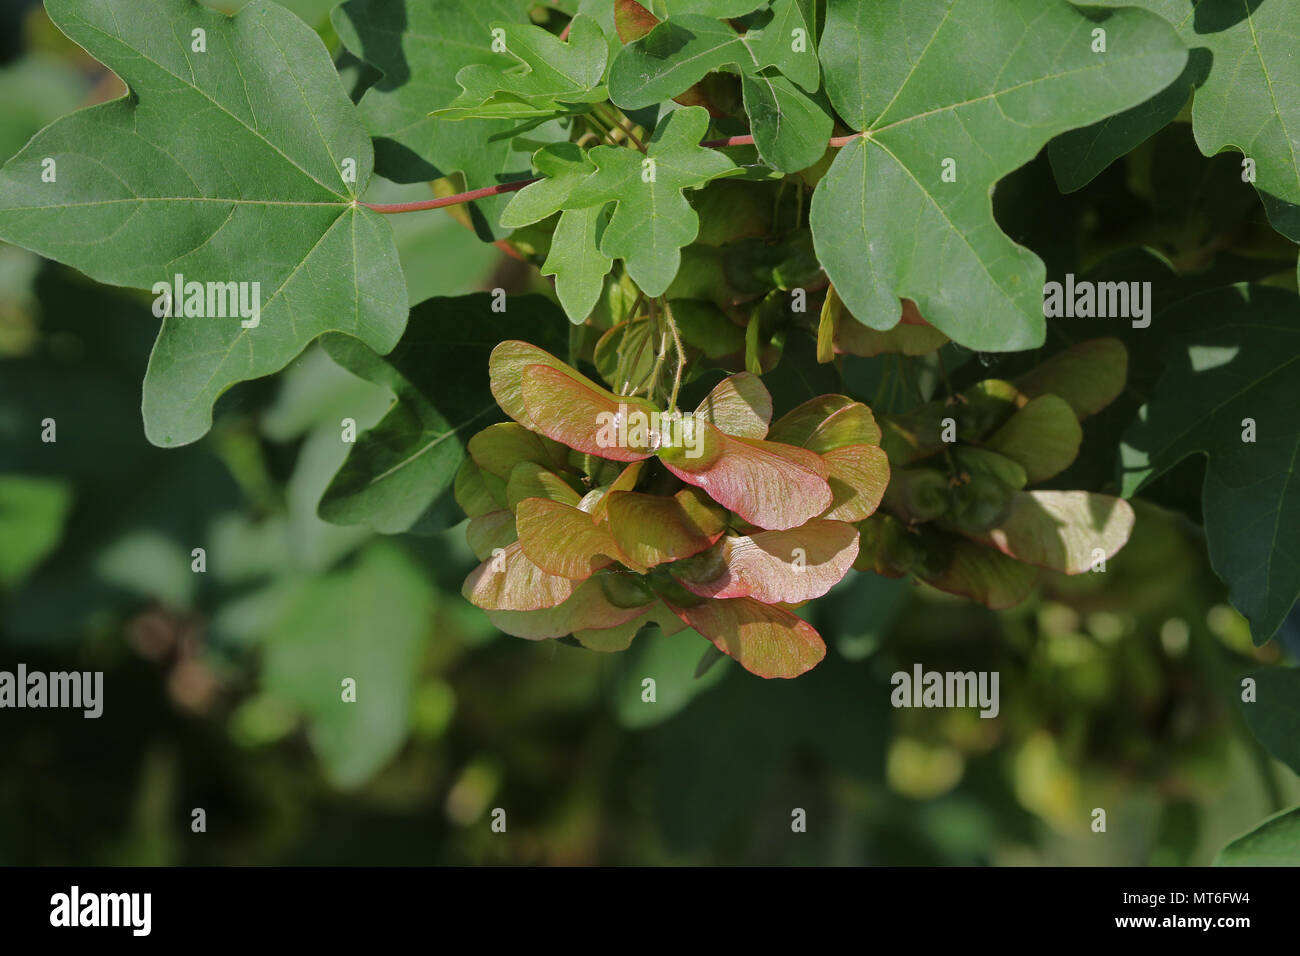 ripening maple or sycamore seed very close up Latin acer opalus or pseudoplatanus variety Italian maple in springtime Italy Stock Photo